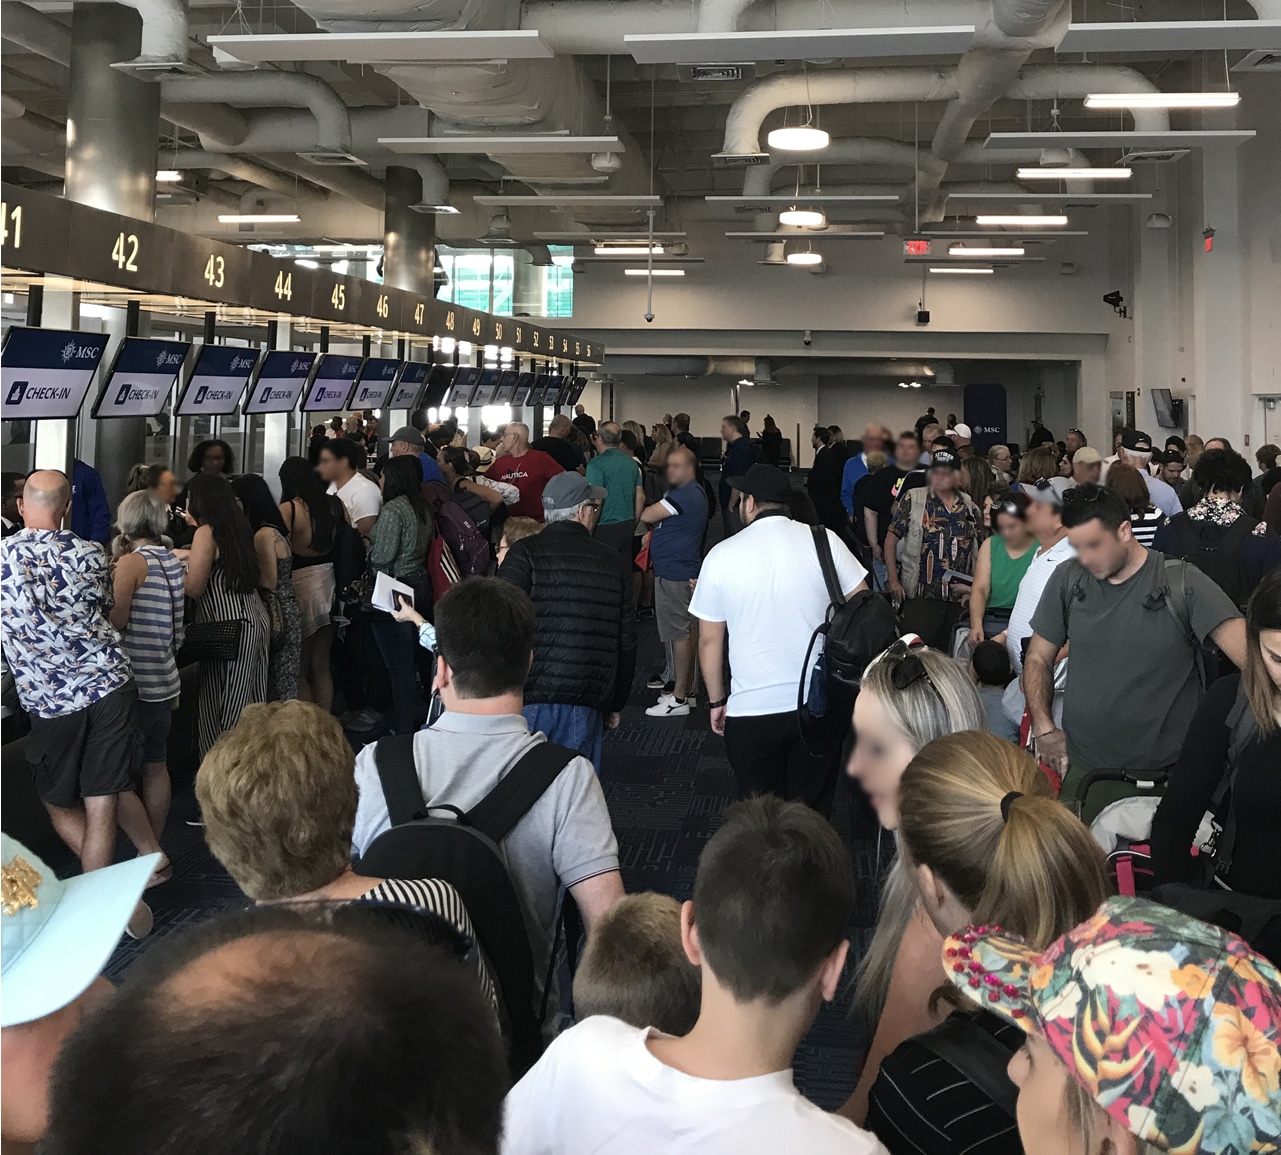 Crowded check-in area